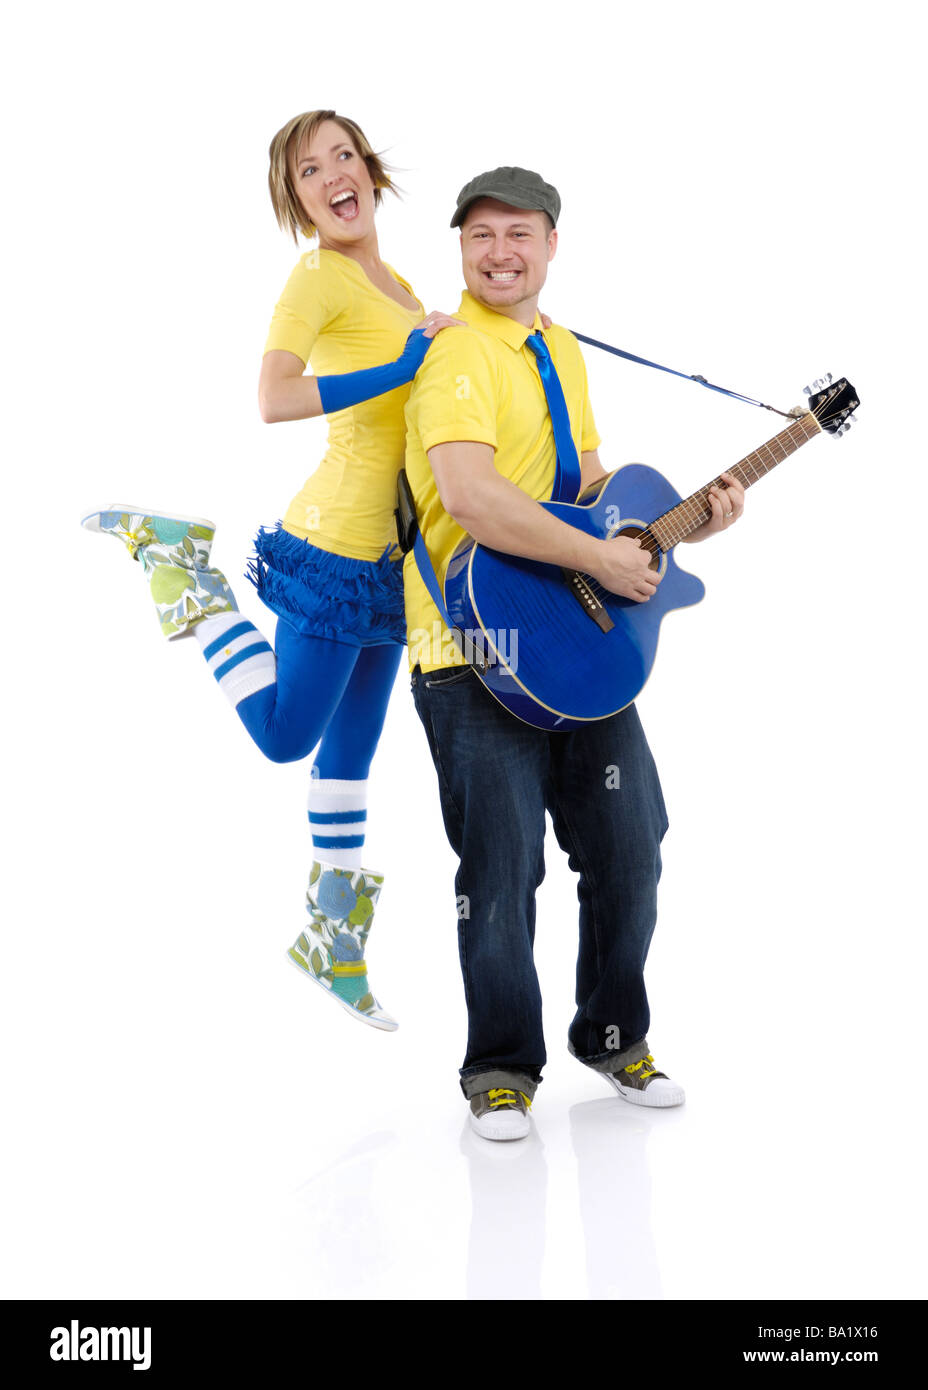 License available at MaximImages.com - Man playing the guitar and a woman dancing Stock Photo